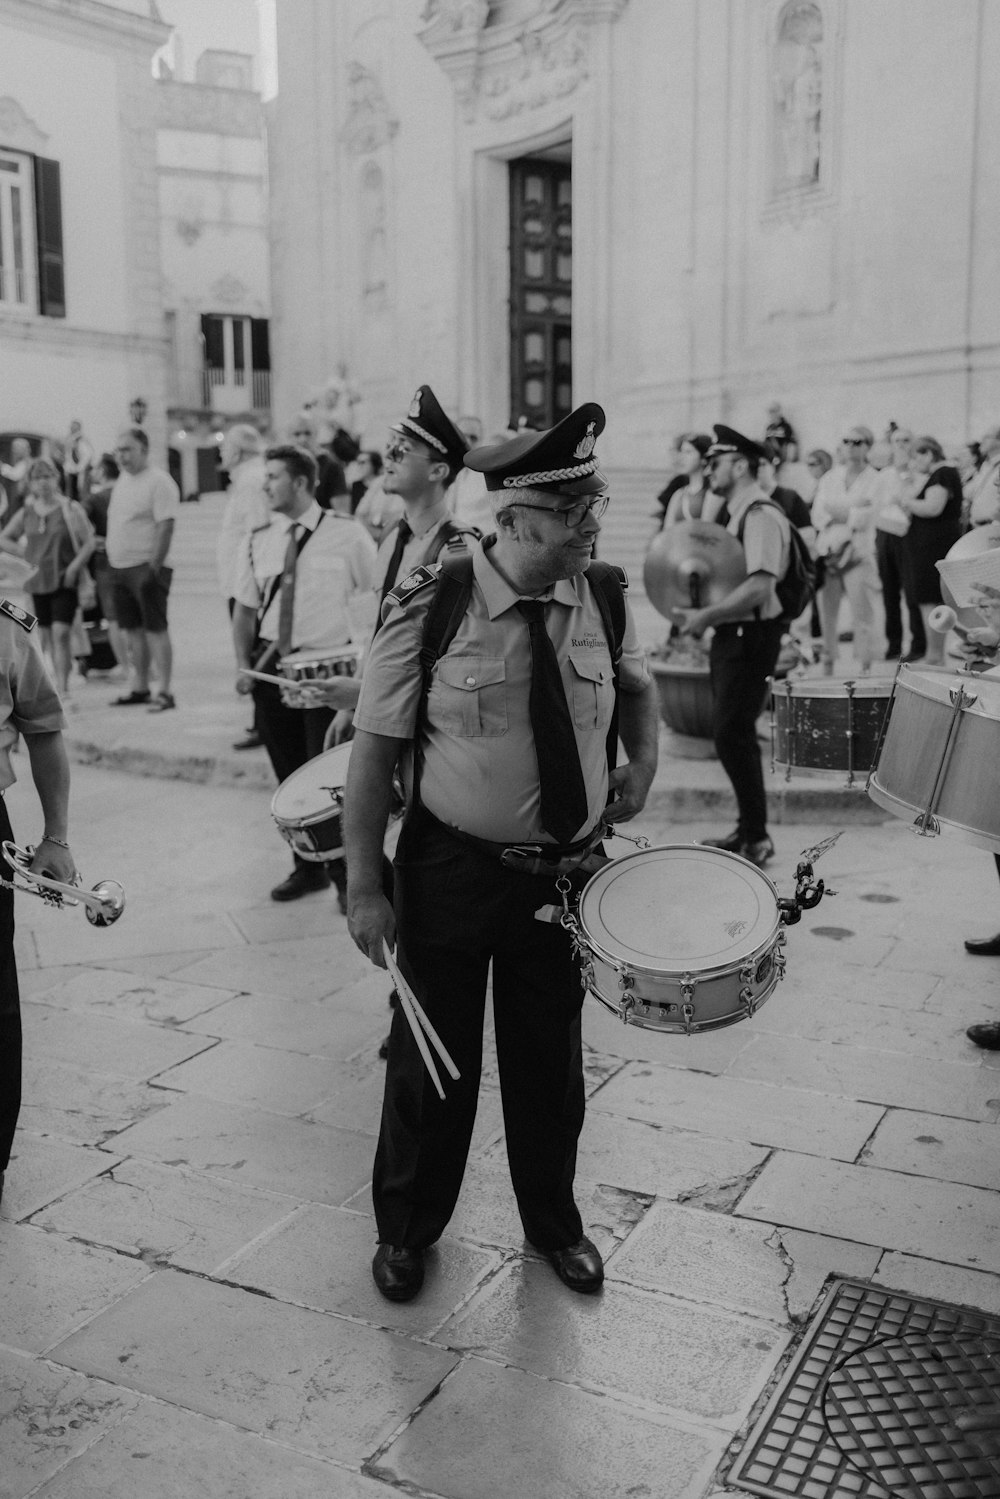 a group of men in uniform playing drums